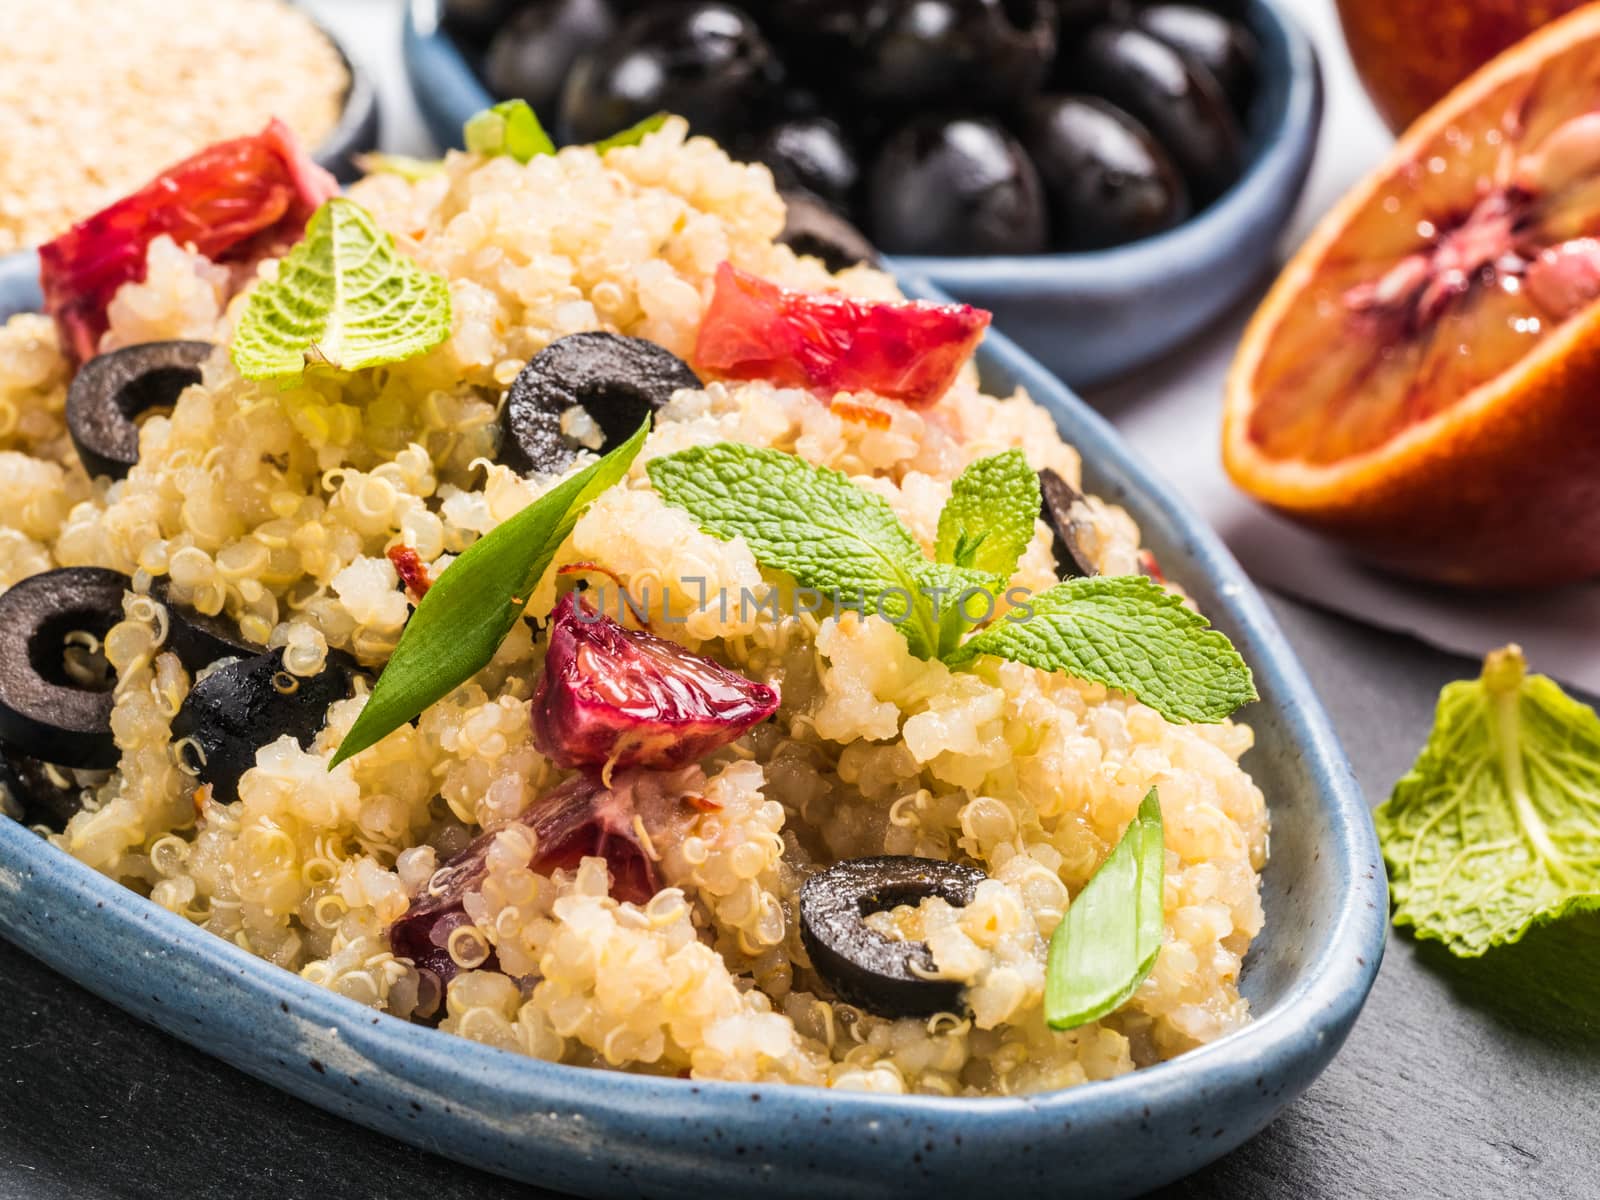 Vegan salad with quinoa, red orange and black olives by fascinadora